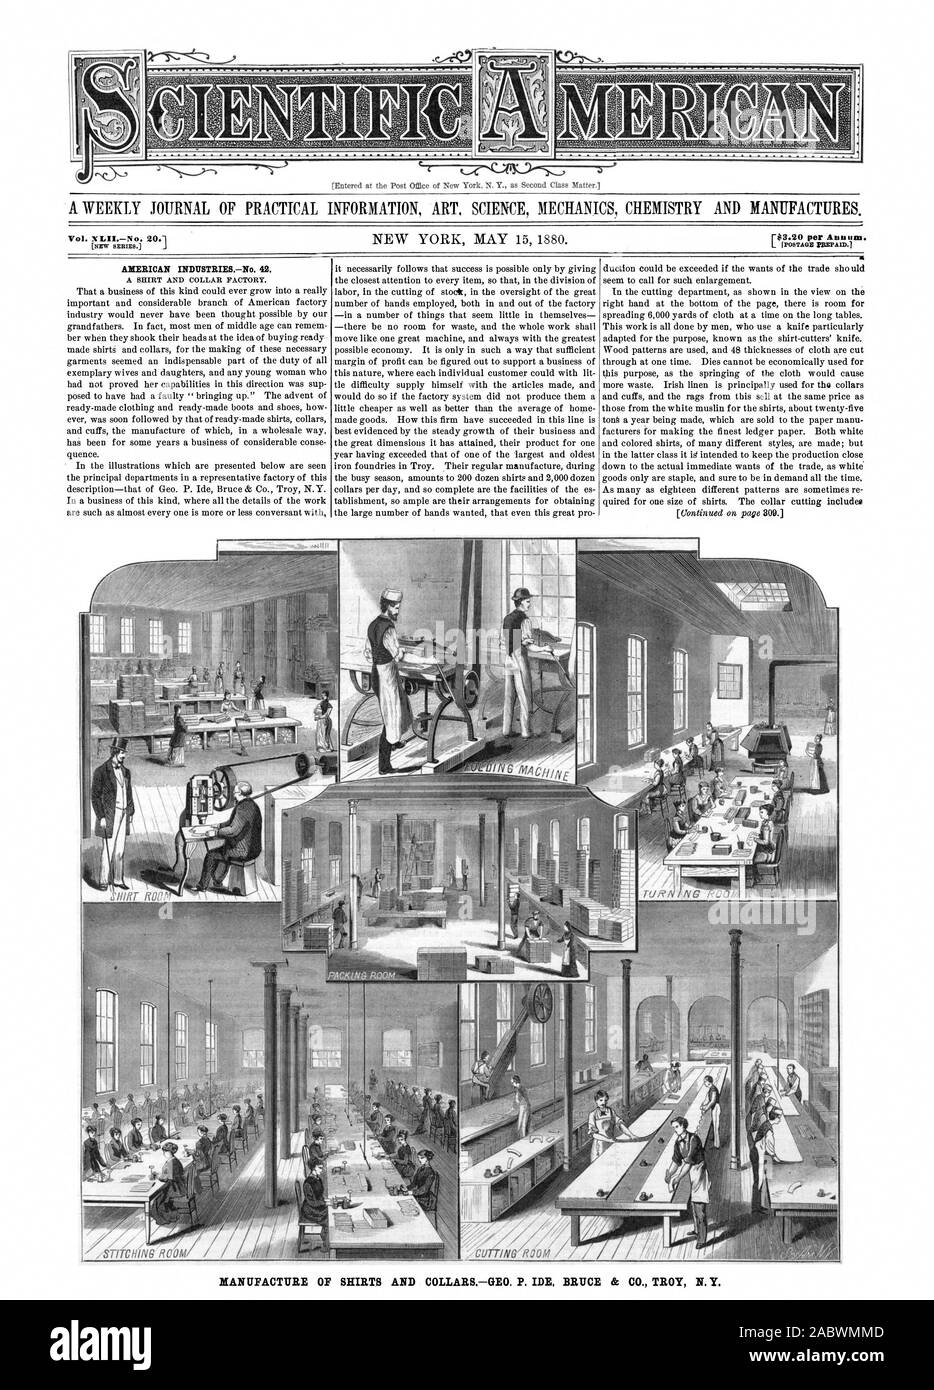 A WEEKLY JOURNAL OF PRACTICAL INFORMATION ART SCIENCE MECHANICS CHEMISTRY AND MANUFACTURES. Vol. XLIINo. 20.1 New moms. AMERICAN INDUSTRIESNo. 42. C MANUFACTURE OF SHIRTS AND COLLARSGEO. P. IDE BRUCE & CO. TROY N. Y., scientific american, 1880-05-15 Stock Photo